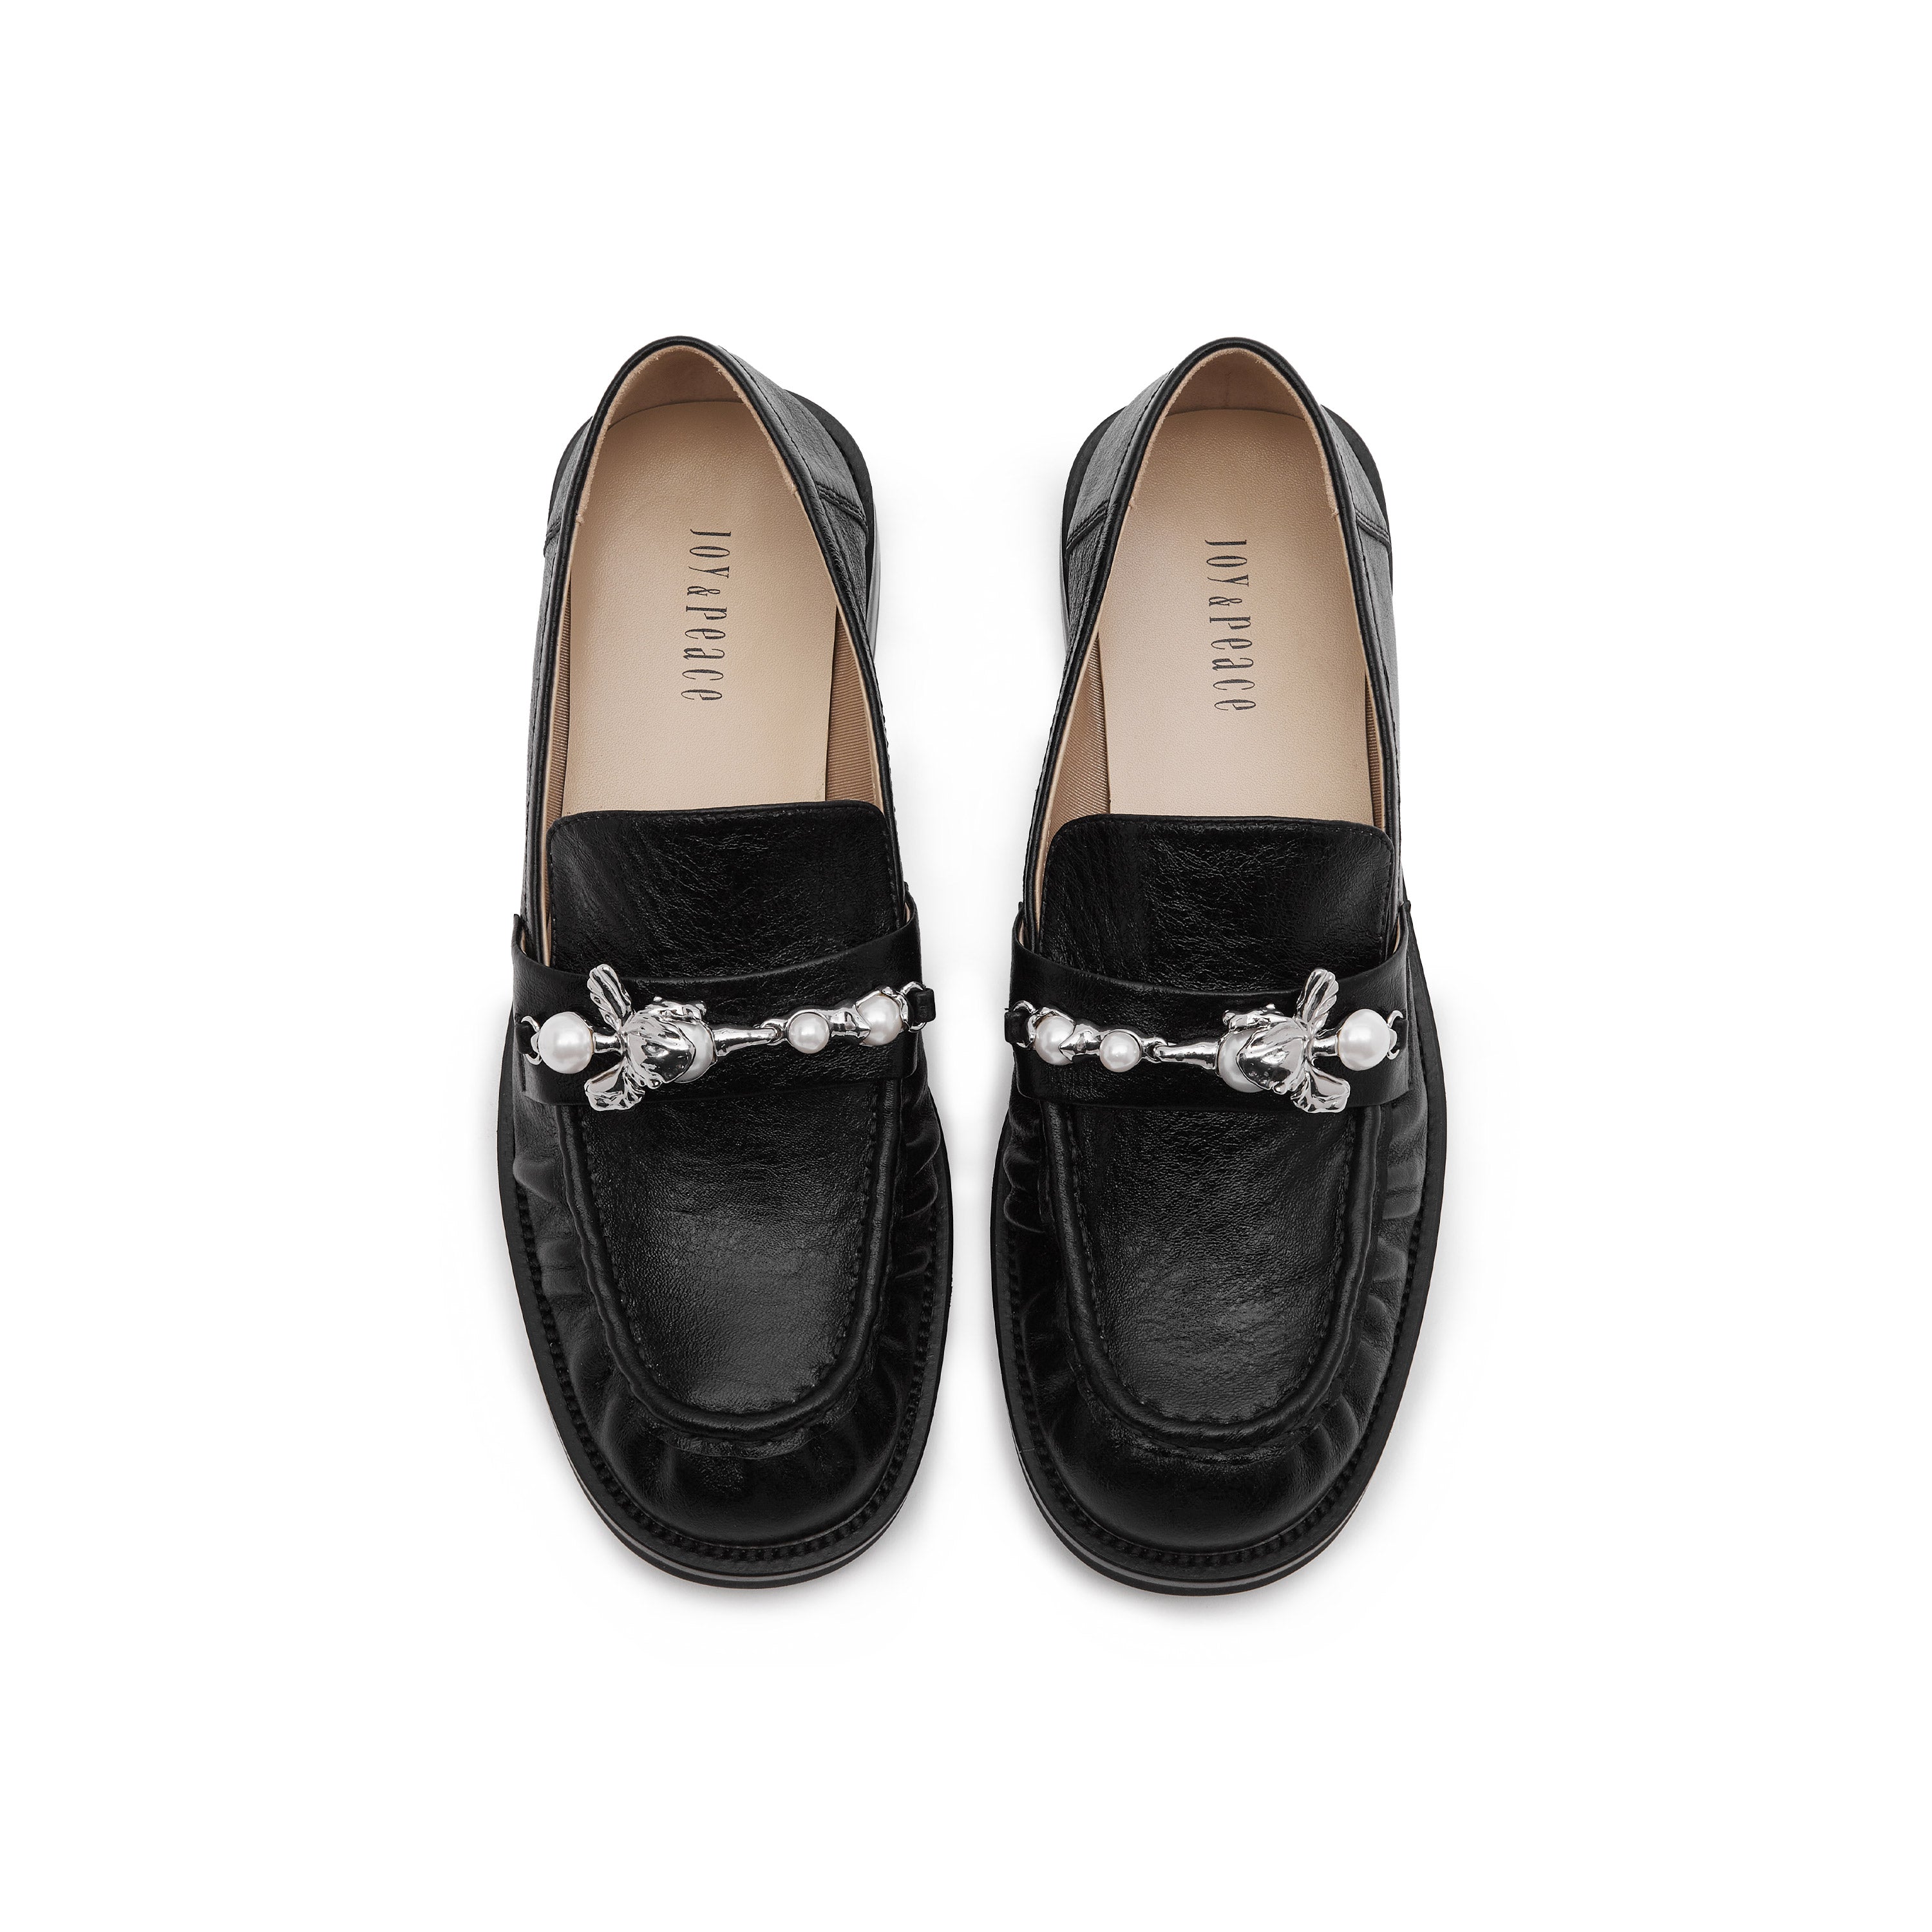 Floral & Pearl Chain Loafers